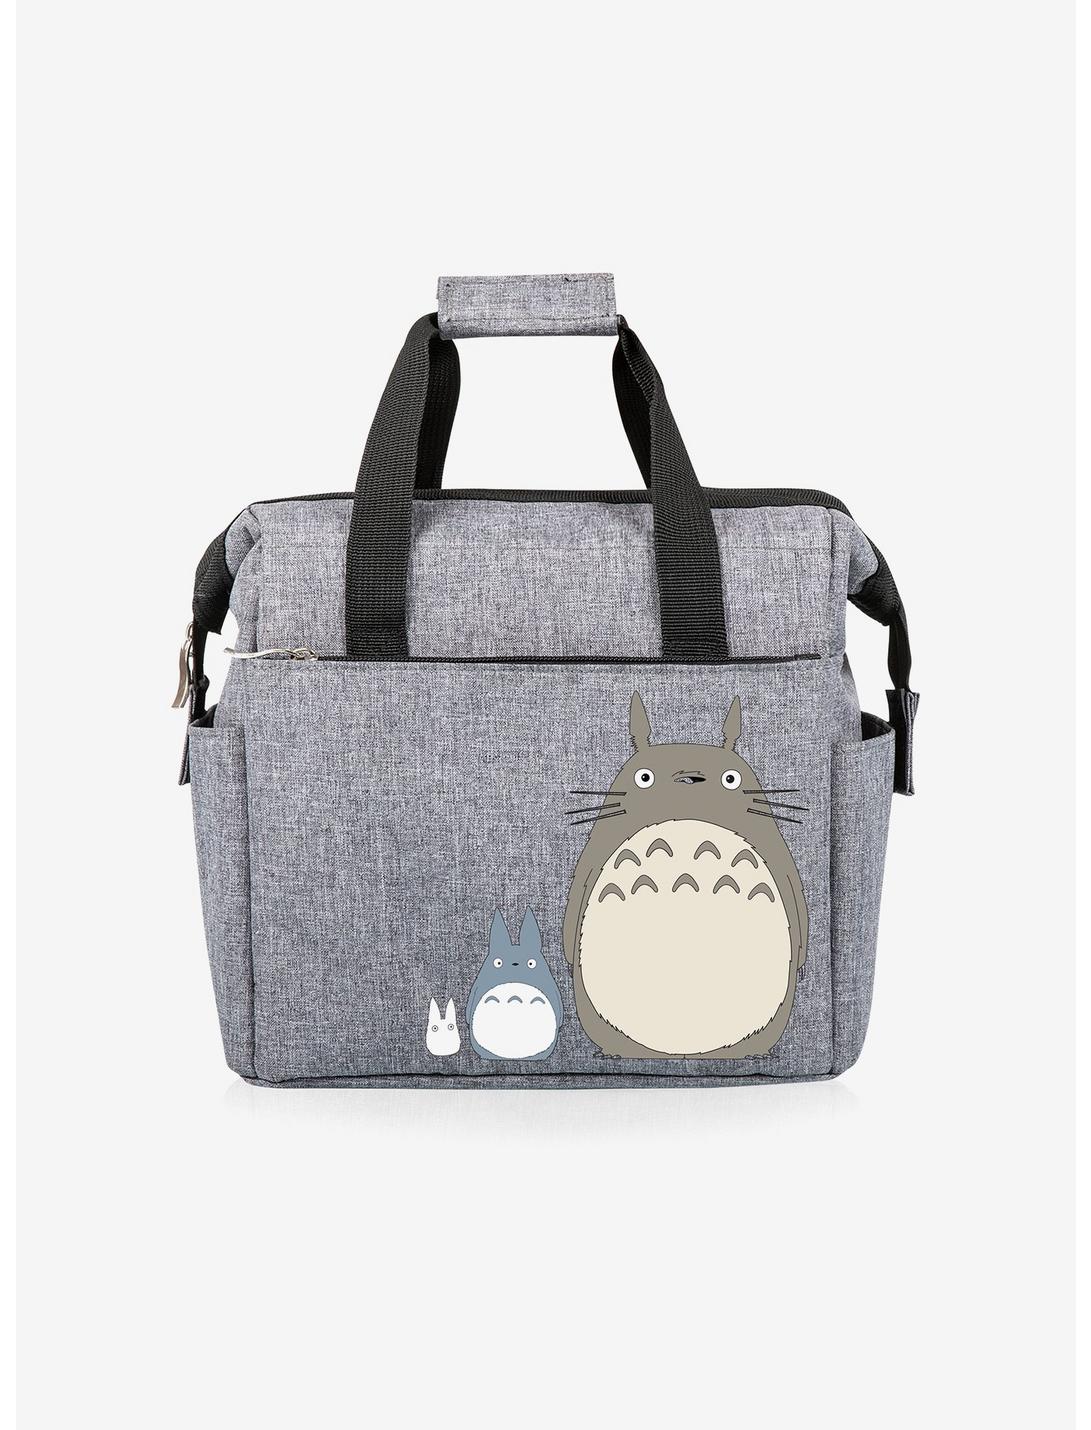 Studio Ghibli Totoro On The Go Lunch Cooler Bag - Hot Topic Exclusive, , hi-res